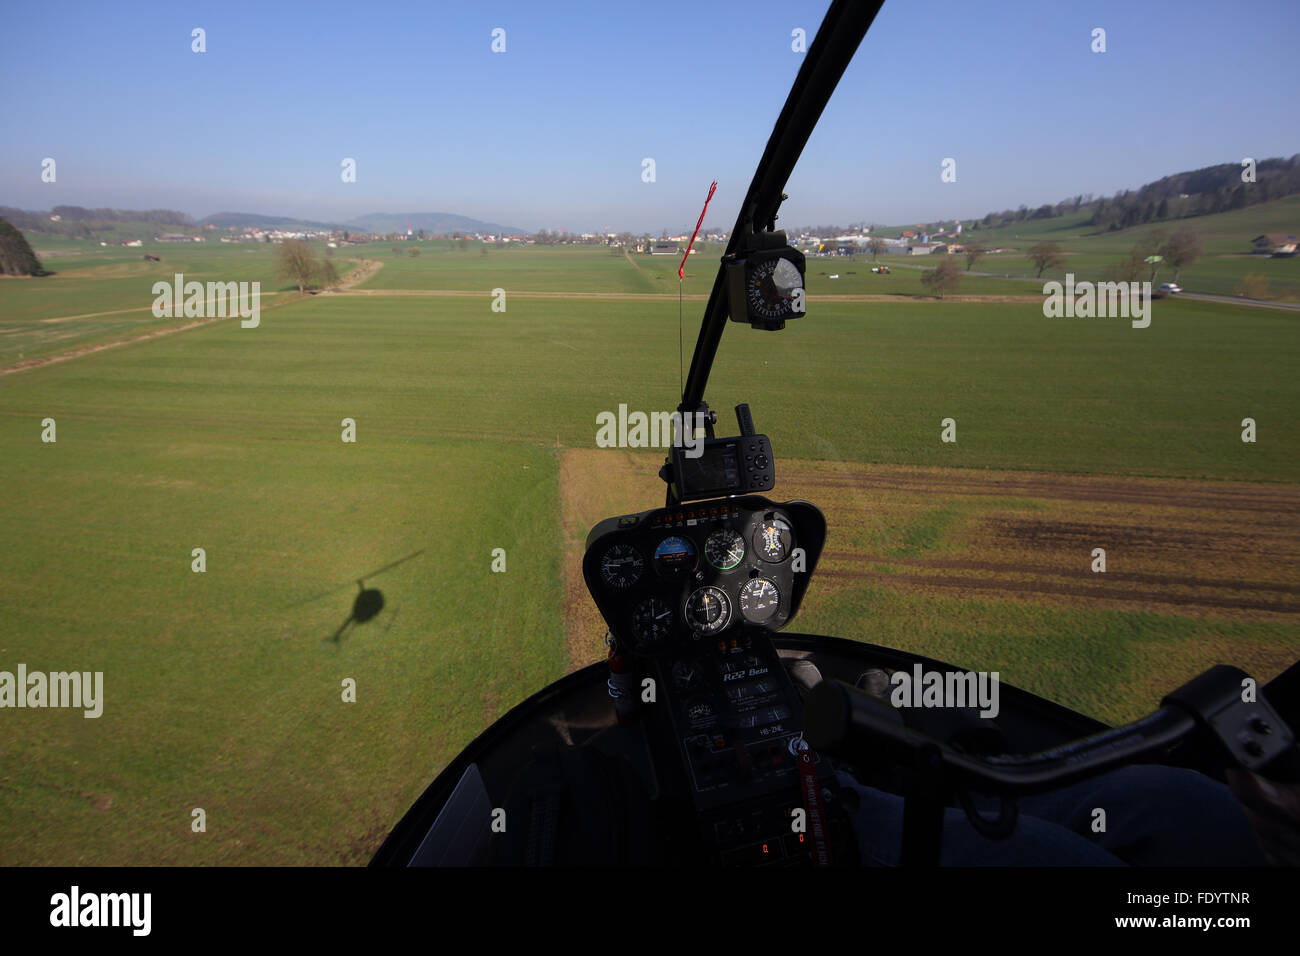 Beromuenster, Switzerland, view from the cockpit of a helicopter during a flight Stock Photo